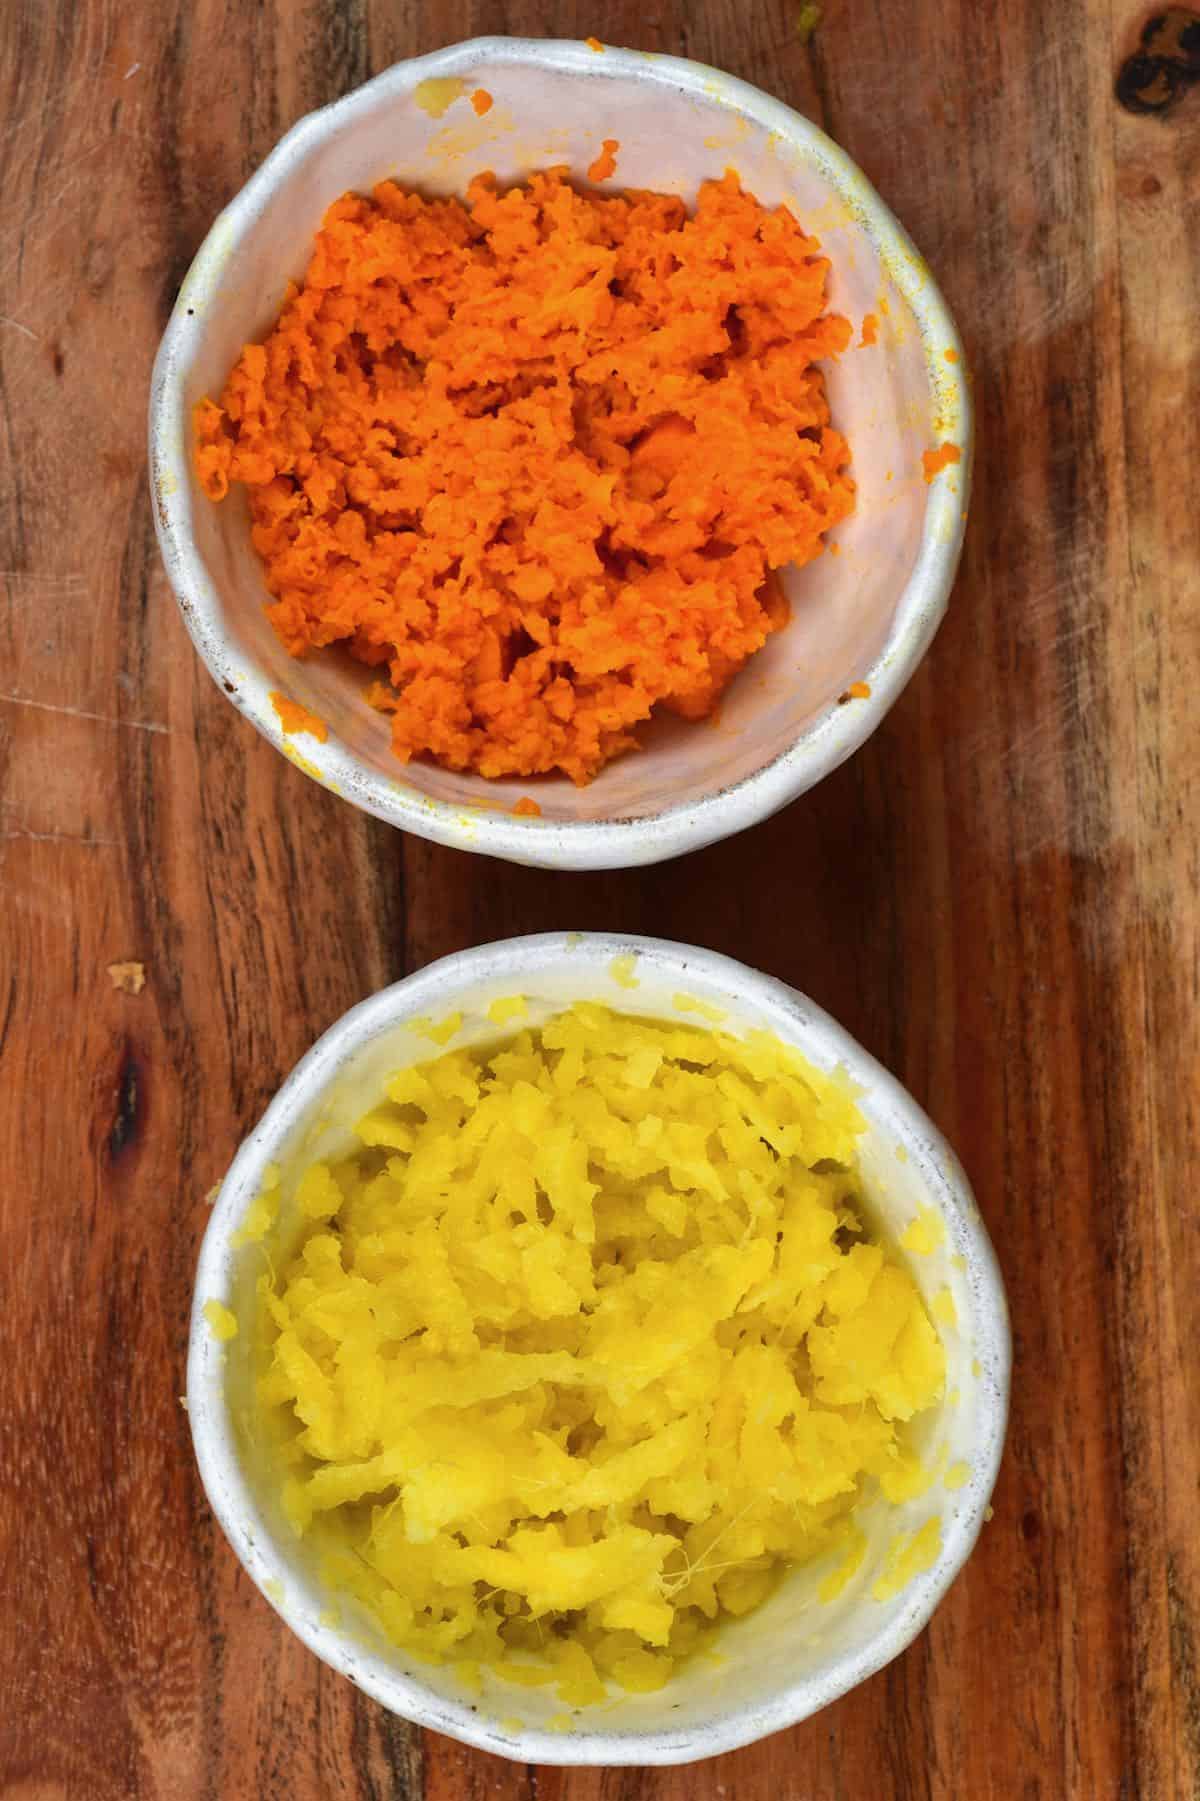 Grated turmeric in a small bowl and grated ginger in another small bowl